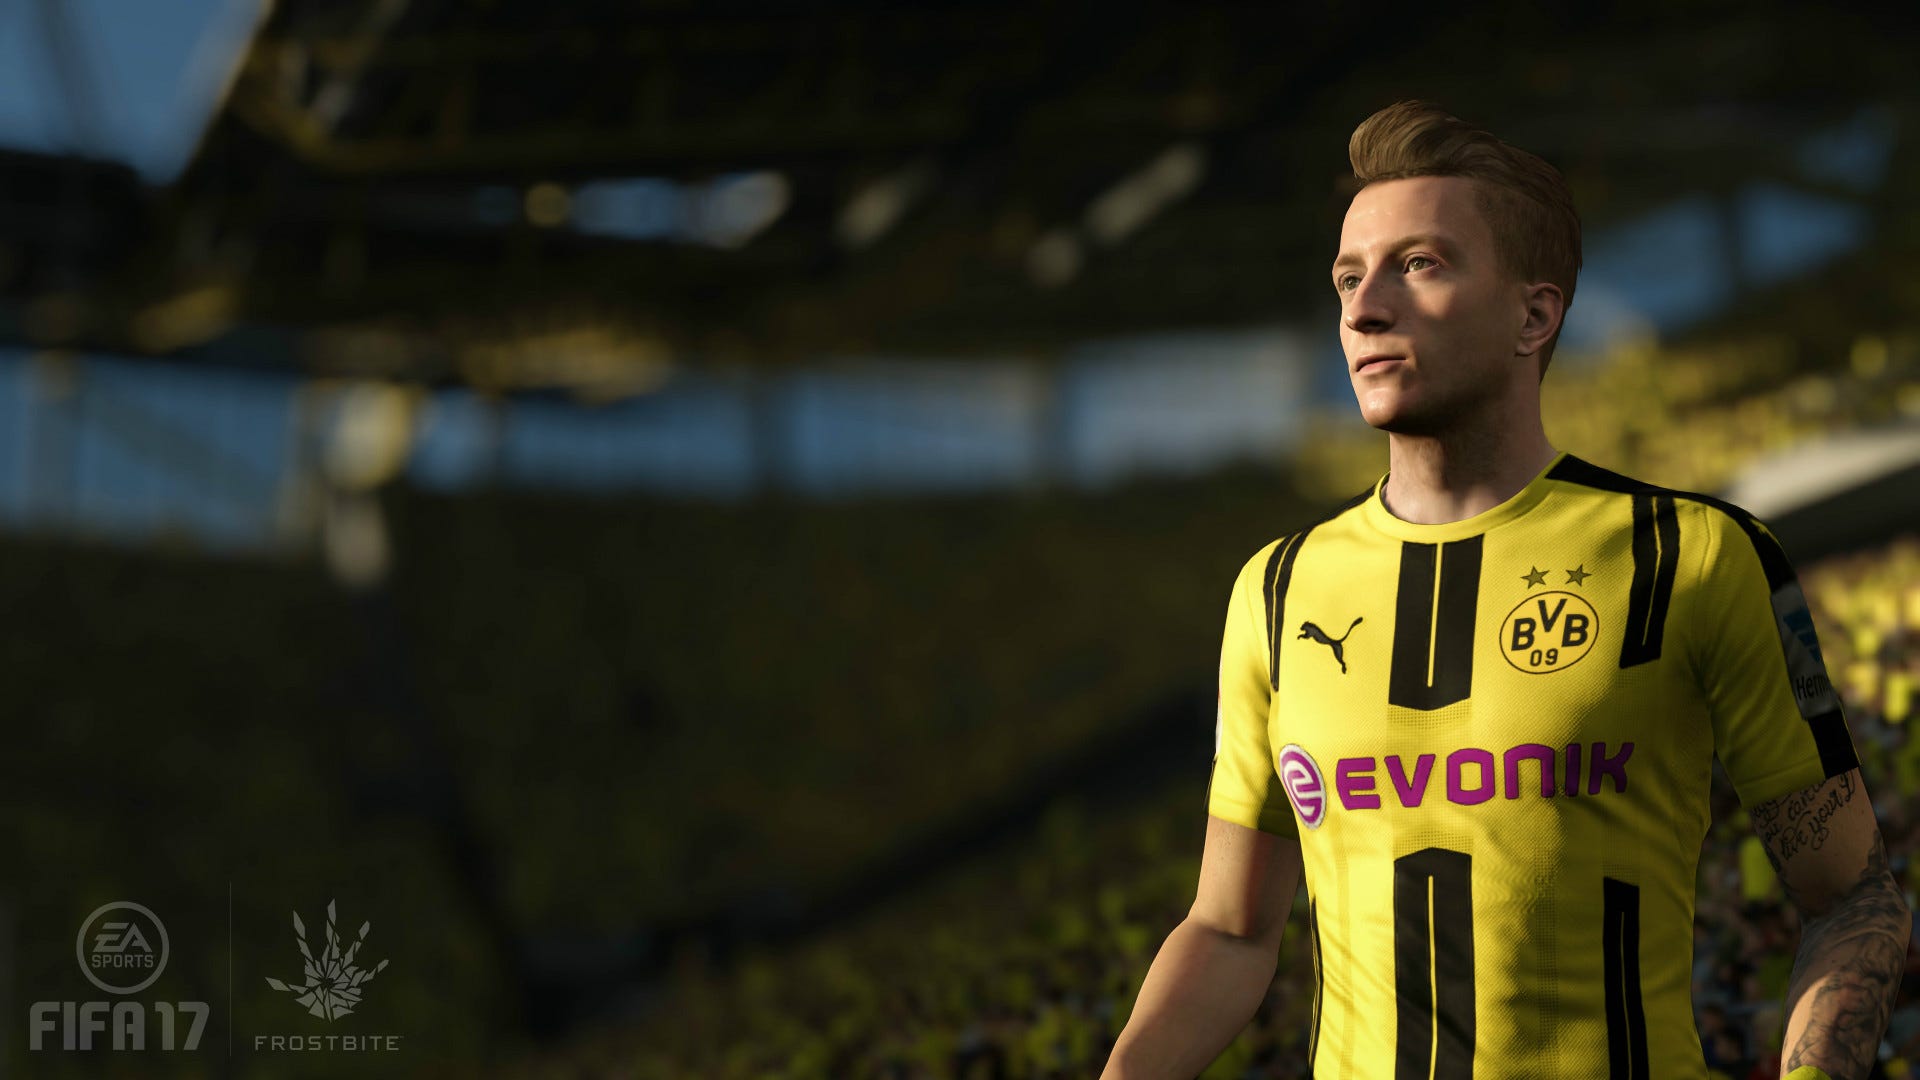 Where would you rank Marco Reus at his best form, among the top players in  the world? - Quora